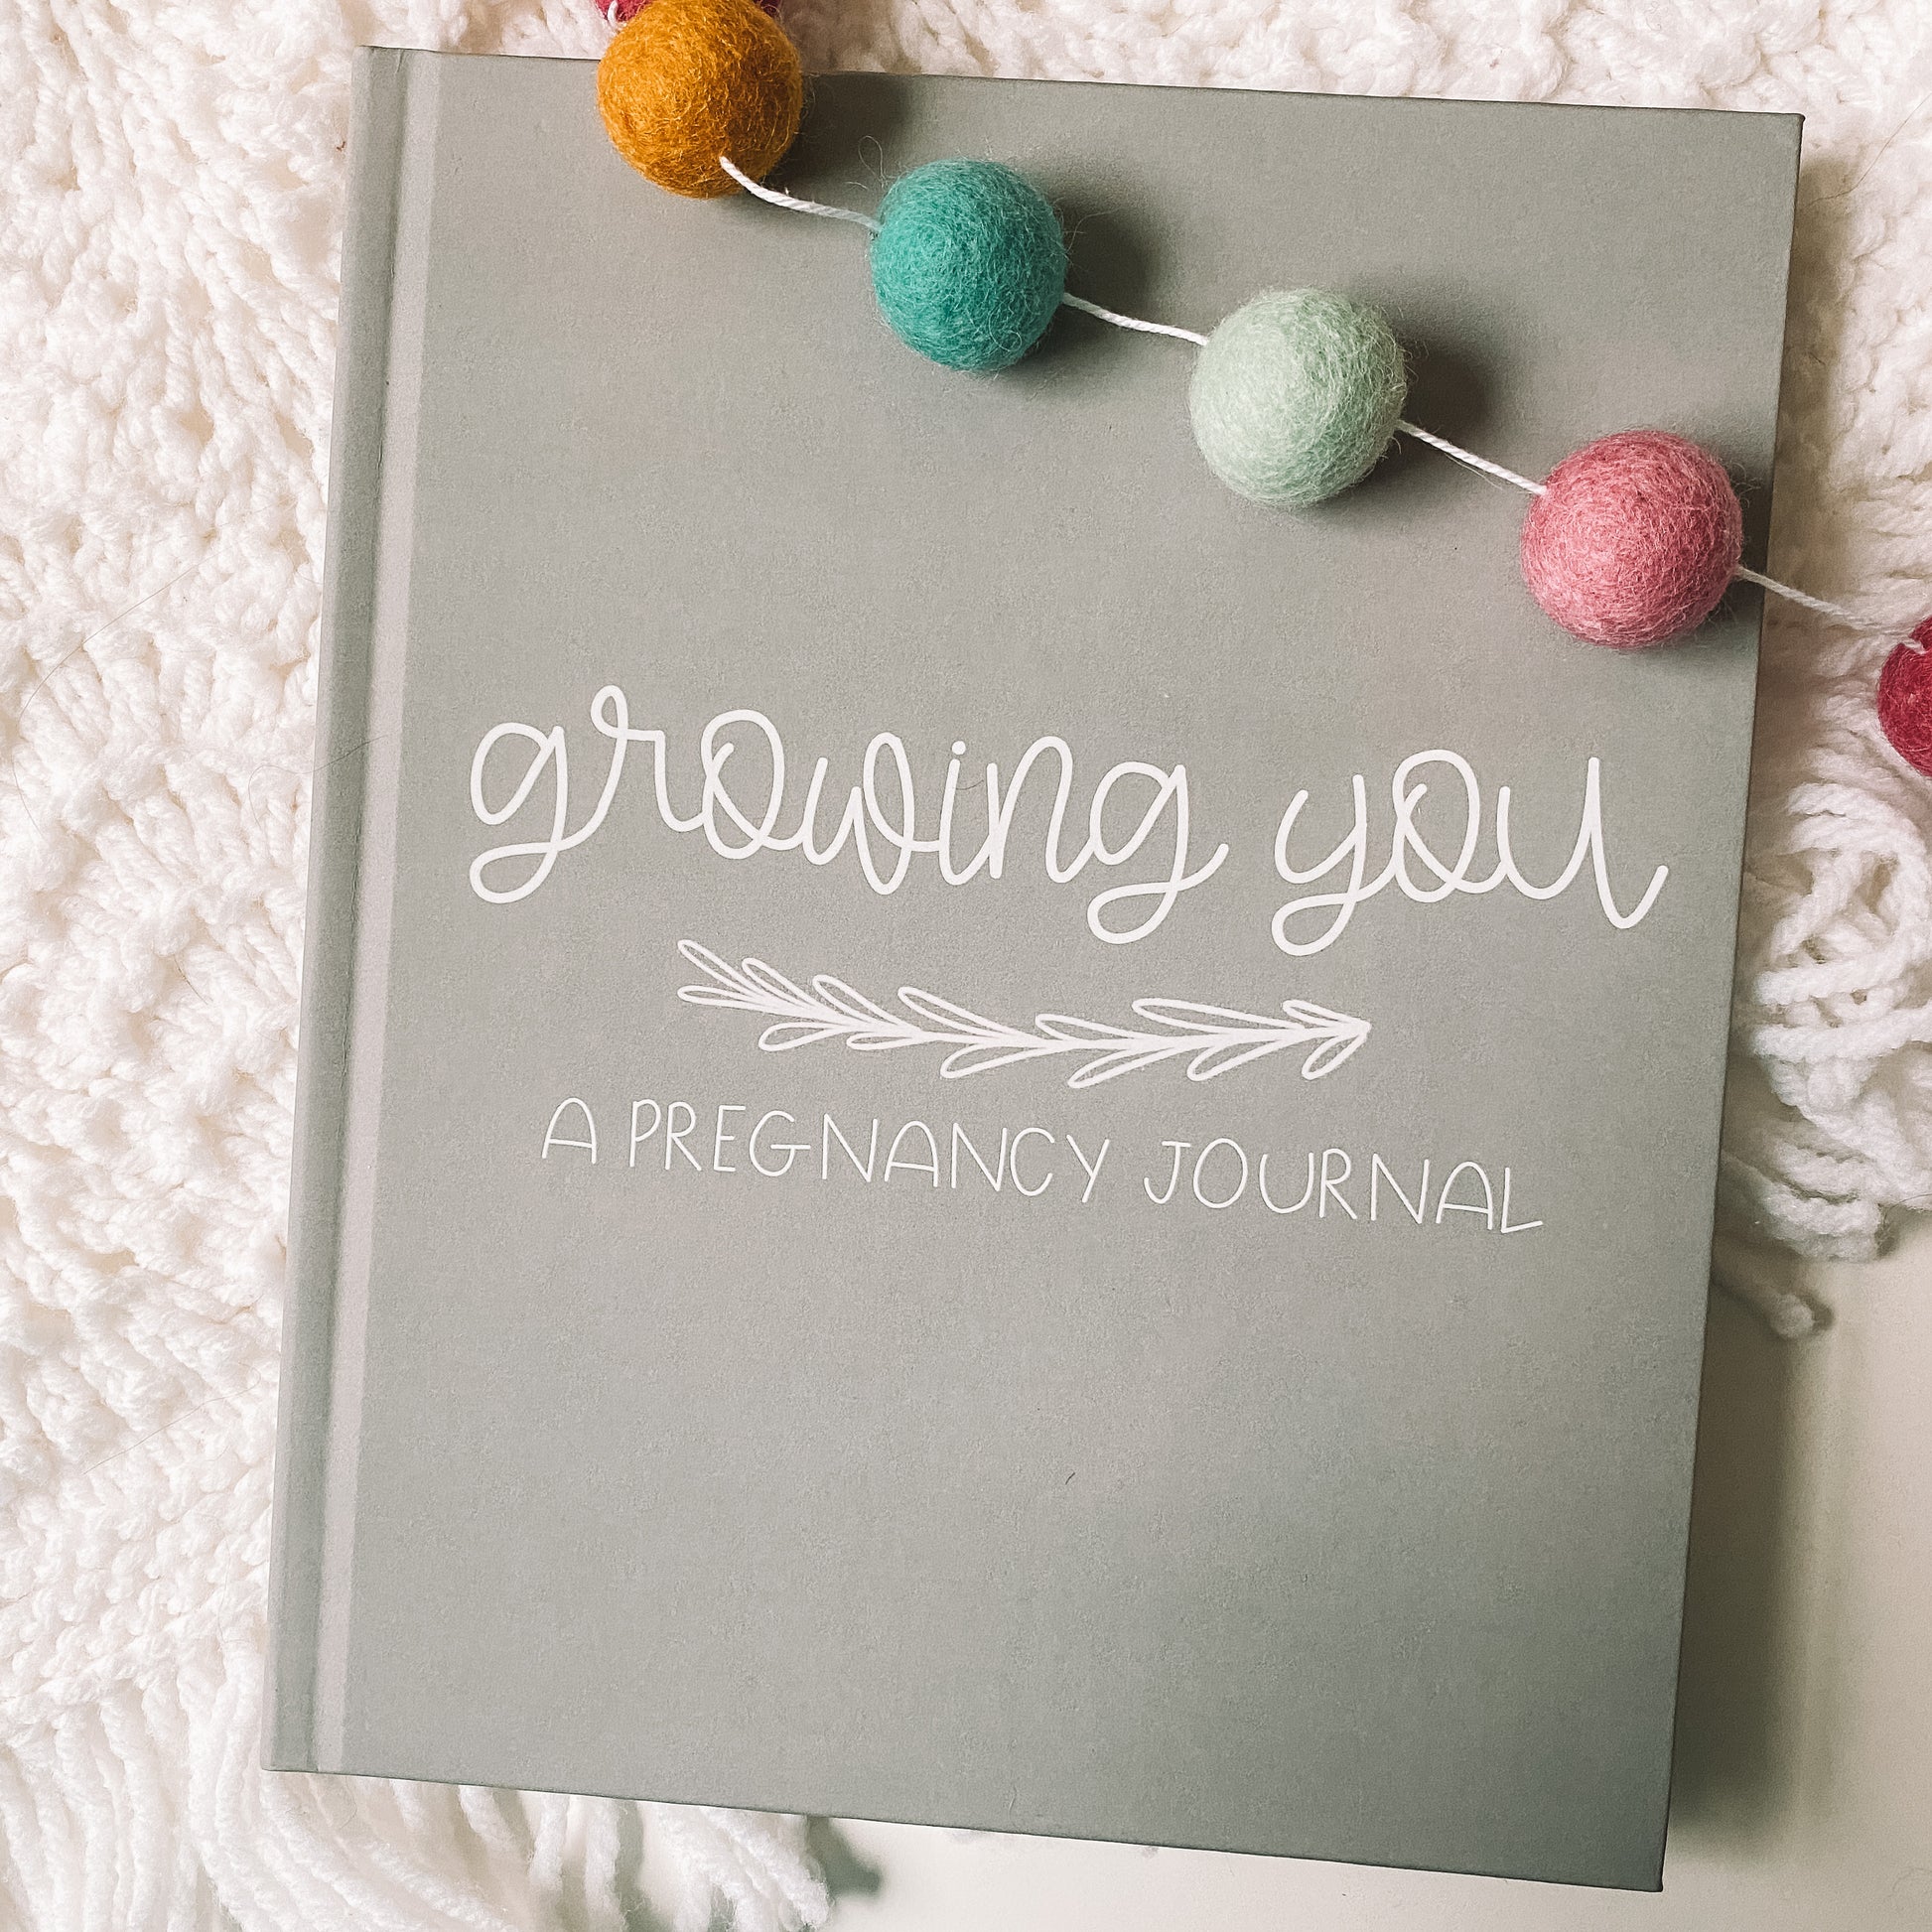 Grey hardcover book with white text titled Growing You A Pregnancy Journal